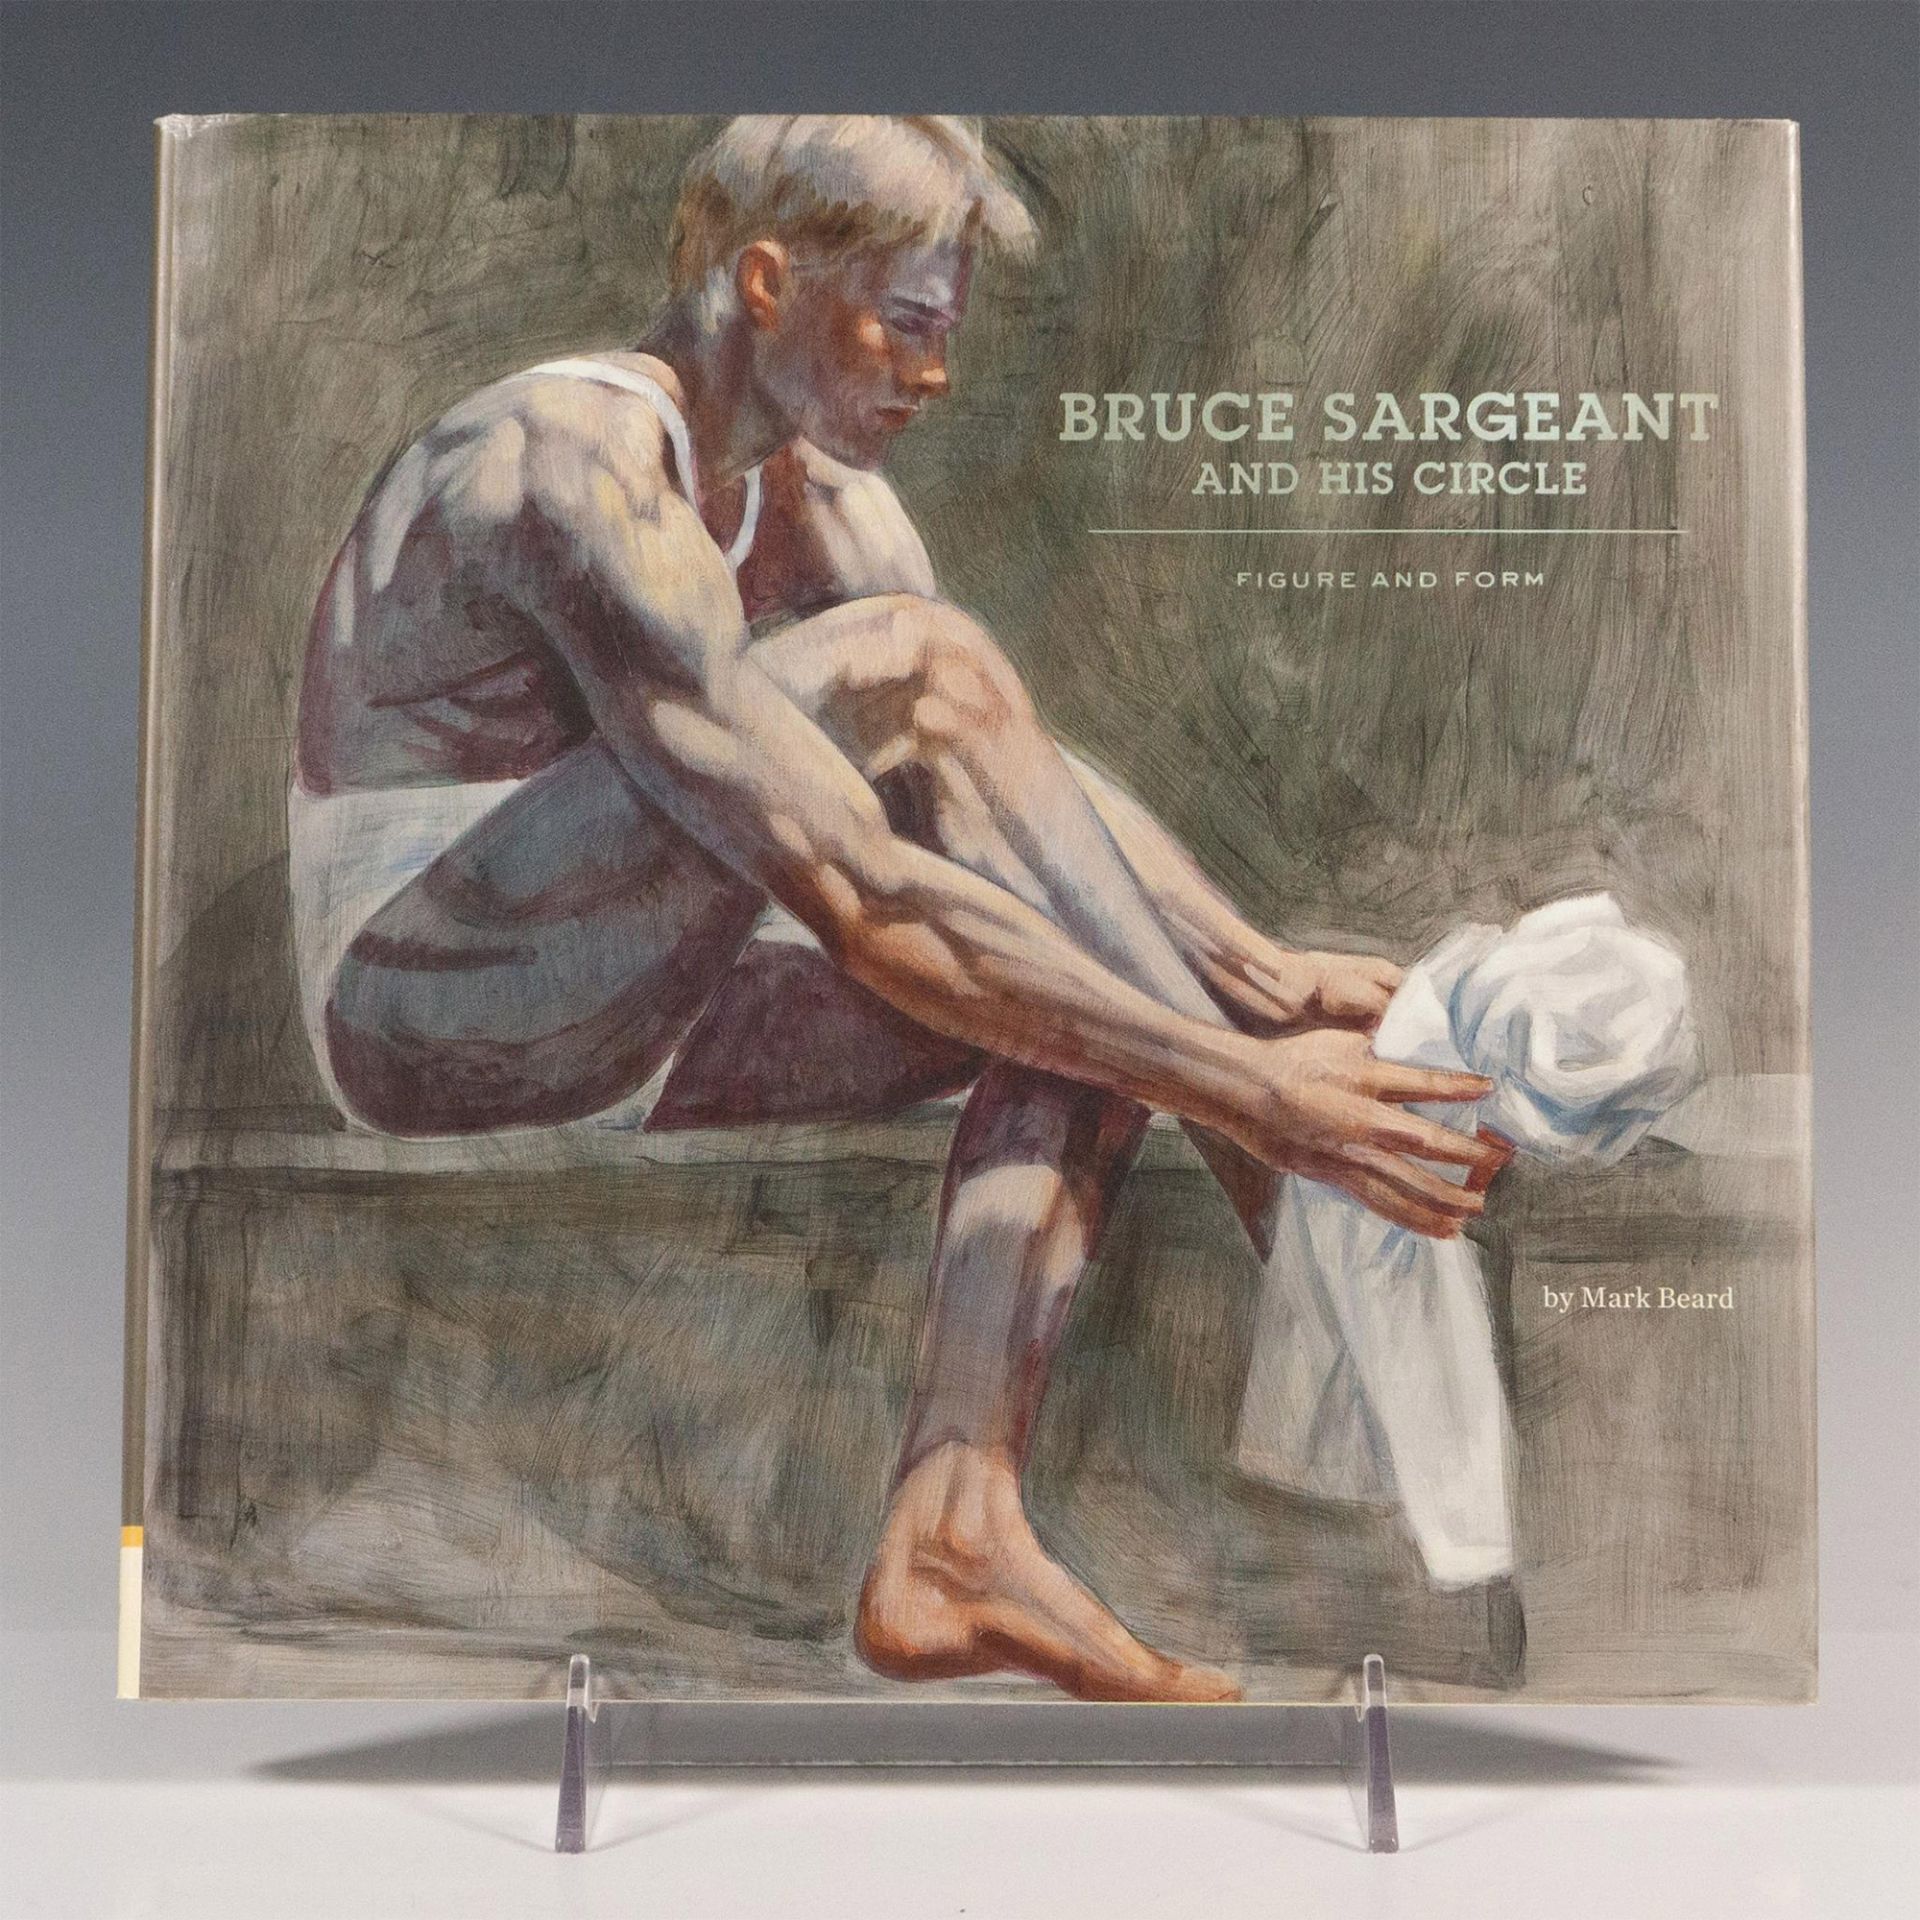 Bruce Sargeant and His Circle, Art Book by Mark Beard